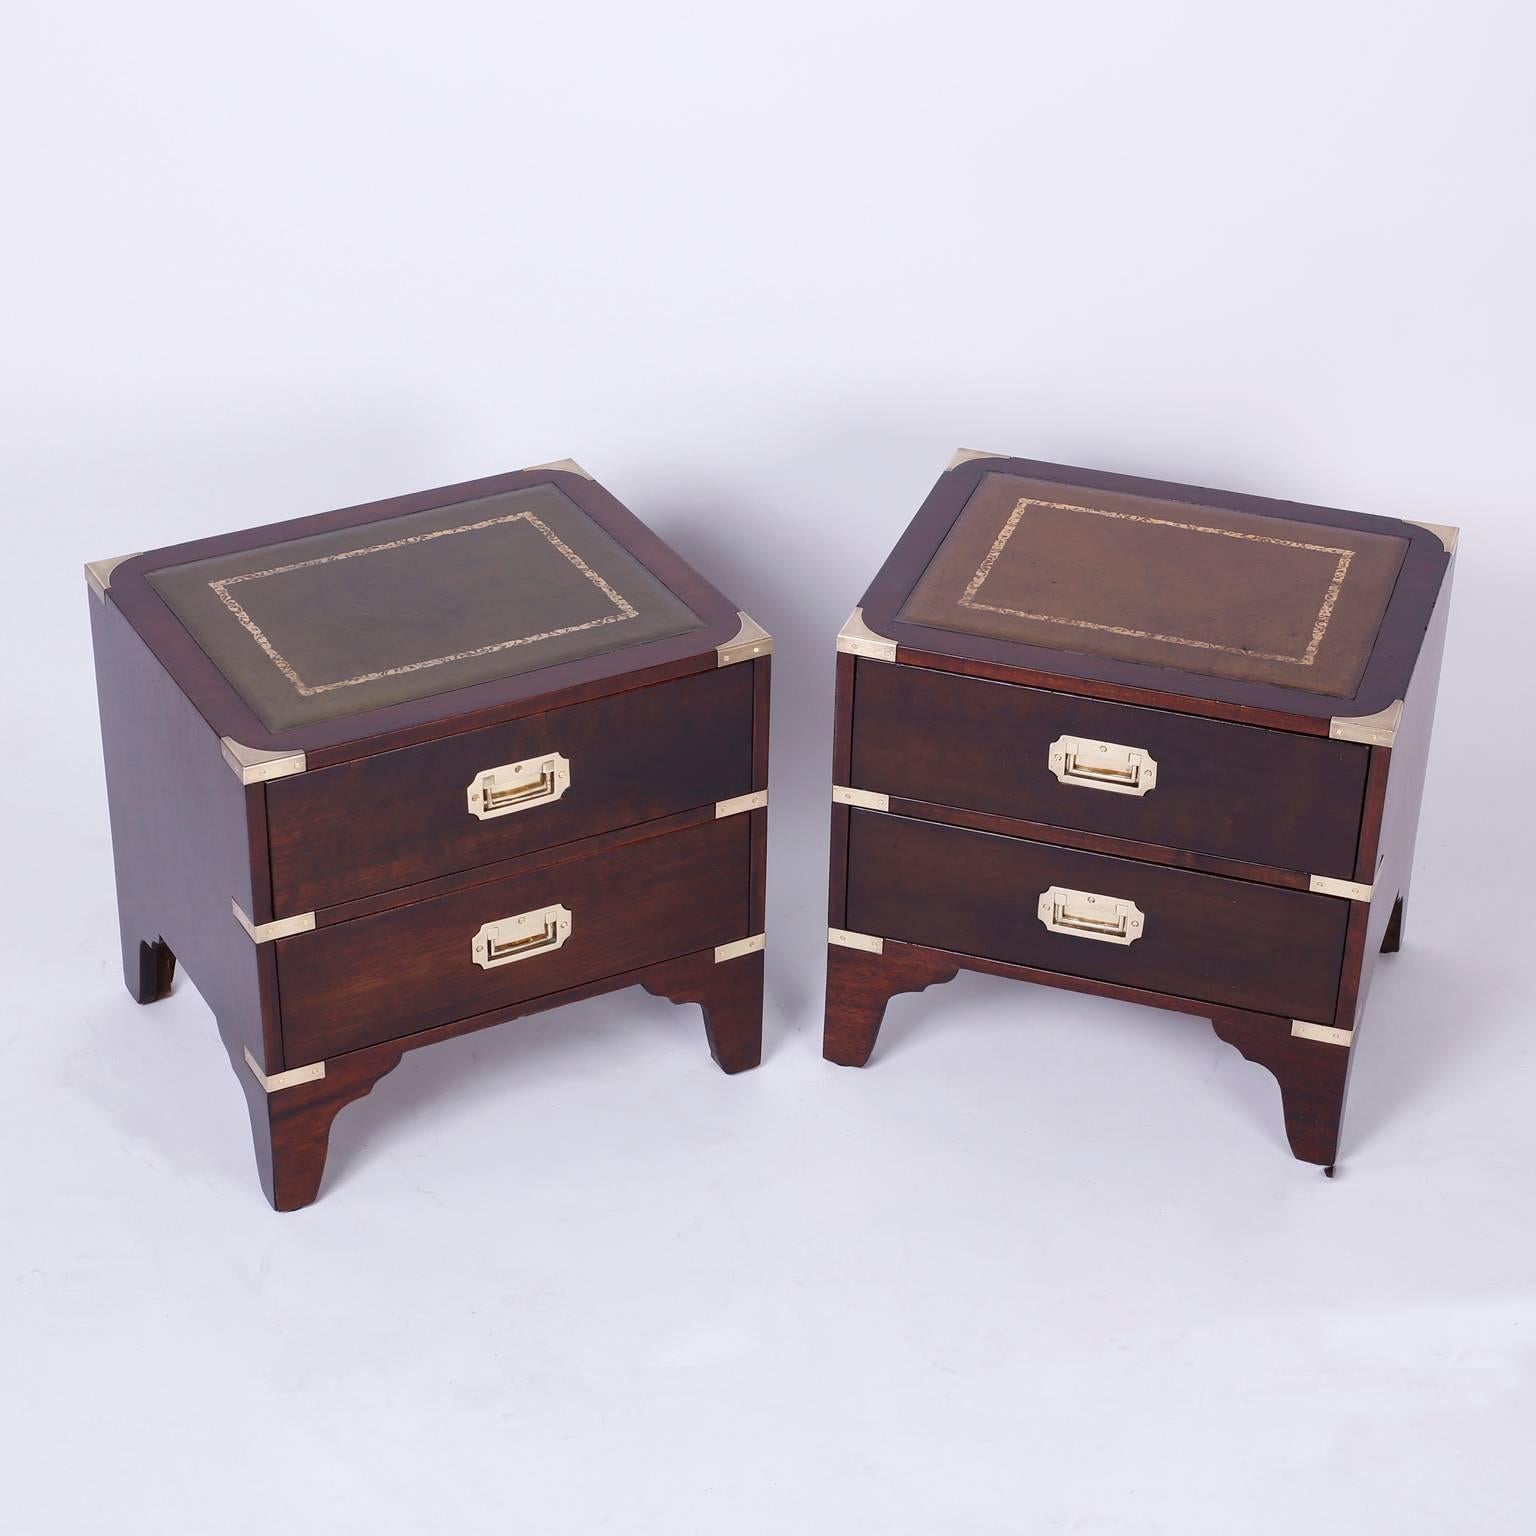 Unusual pair of low two-drawer chests or nightstands with slightly different compatible tooled leather tops, mahogany construction, and brass Campaign style hardware. All this over bracket feet, Classic timeless form.